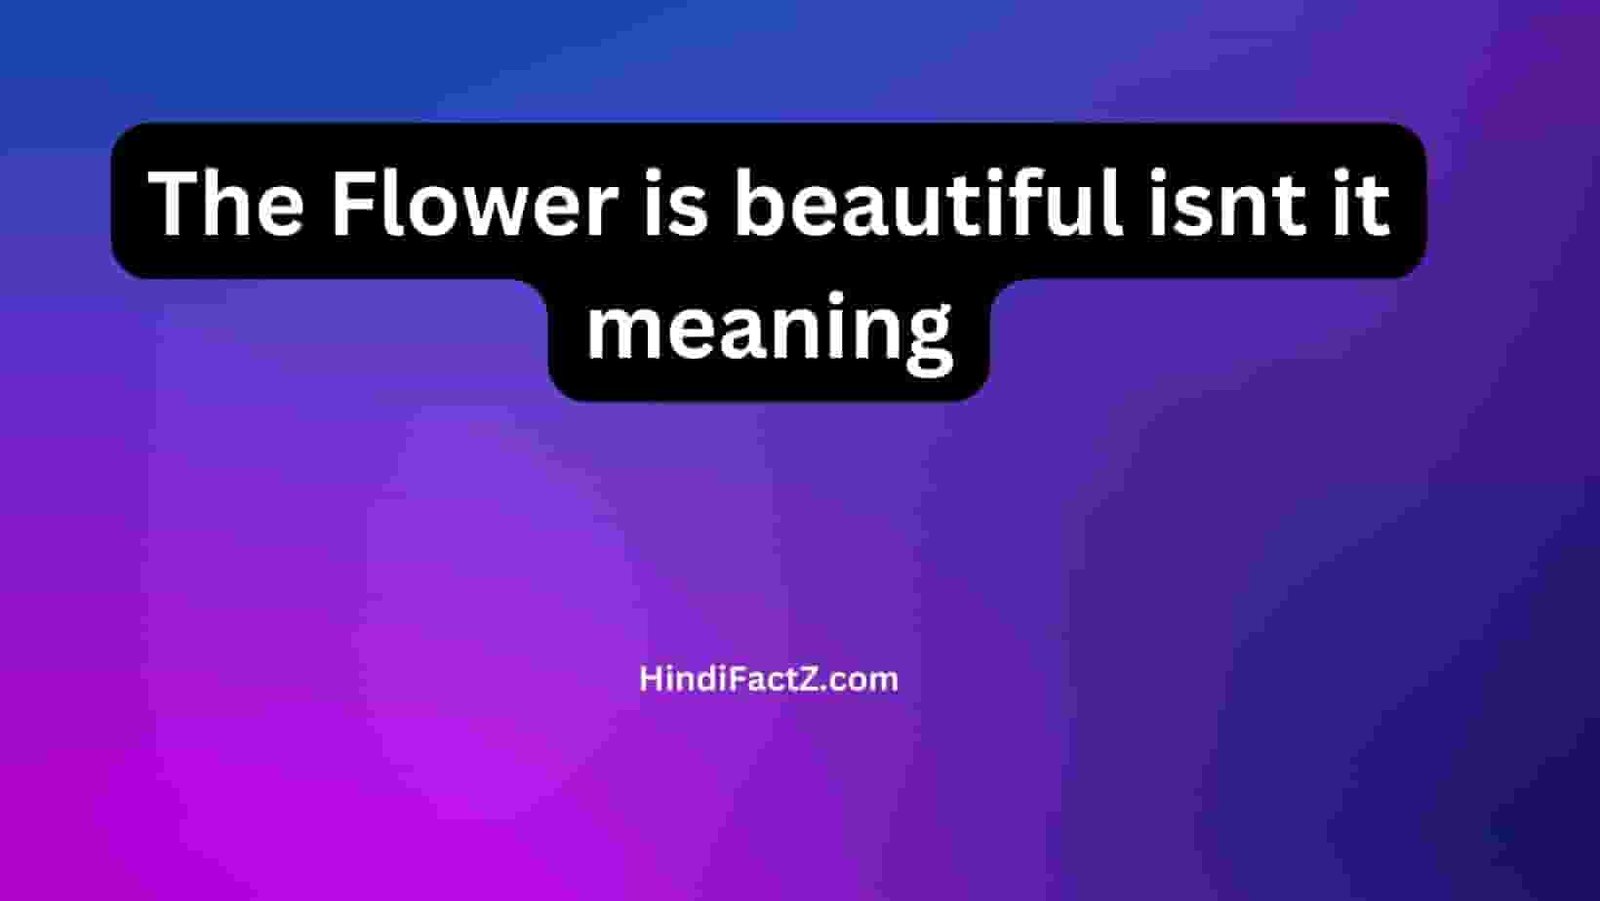 The Flower is beautiful isnt it meaning